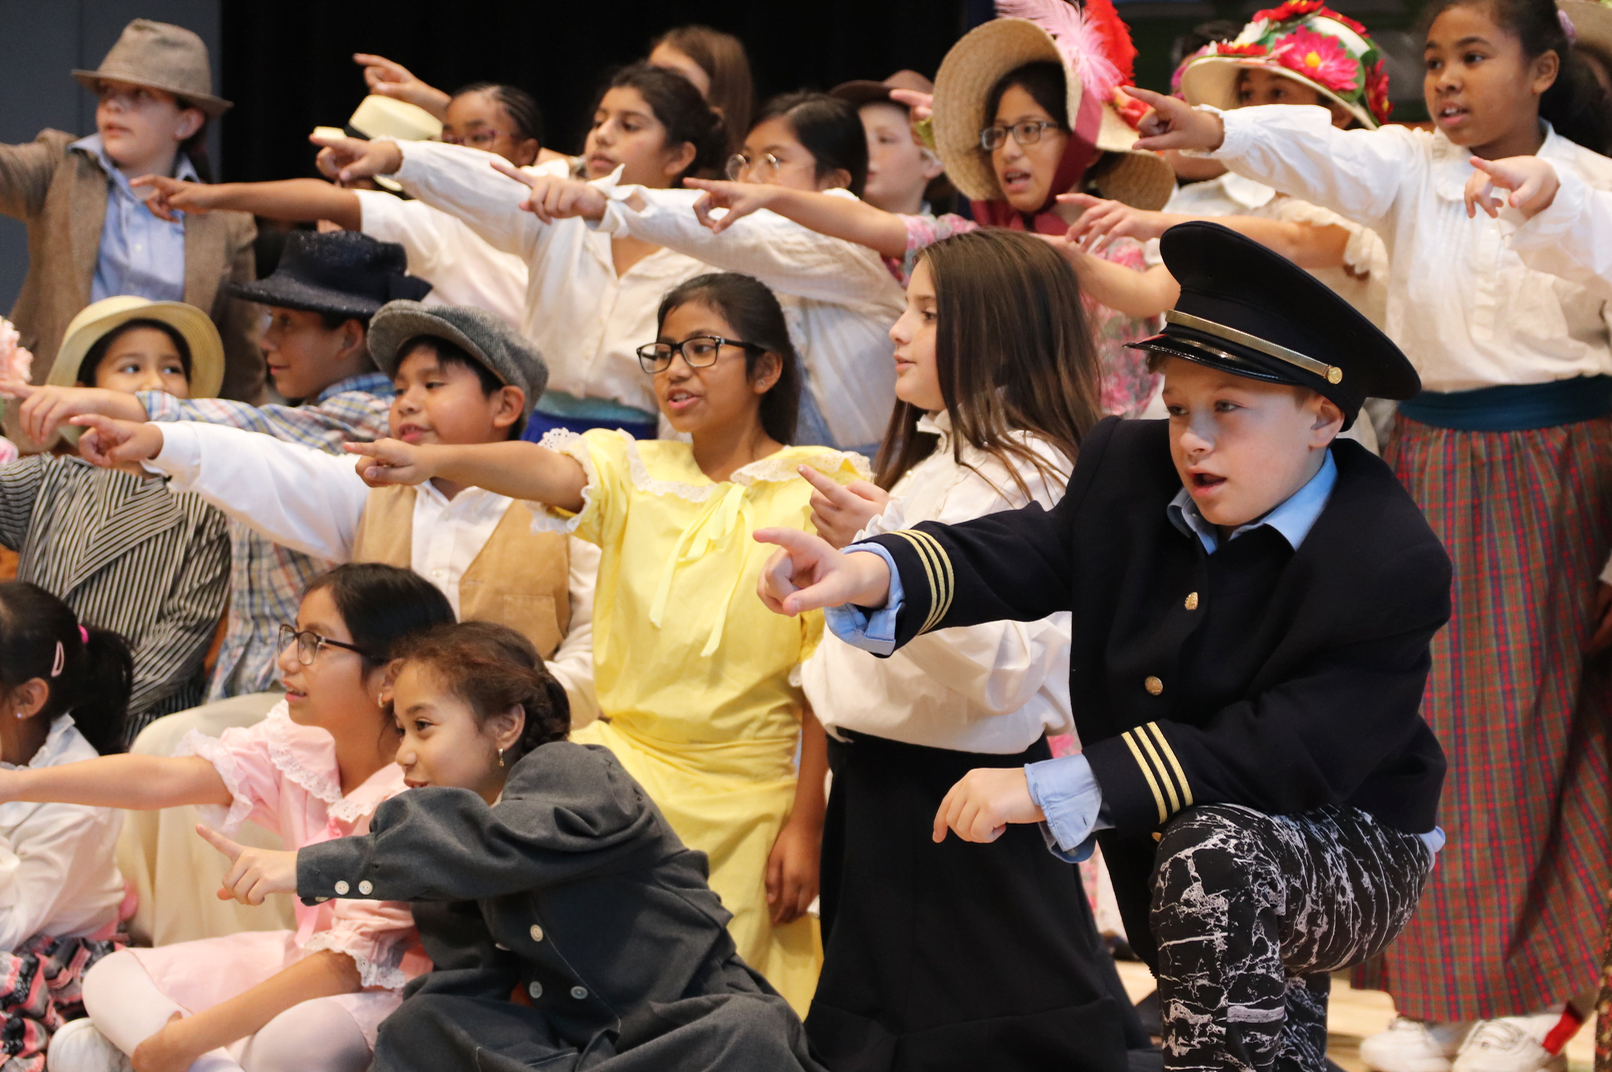 New Lebanon School cast and crew rehearsed The Music Man which they will perform on Nov 26, 2019. Photo: Leslie Yager